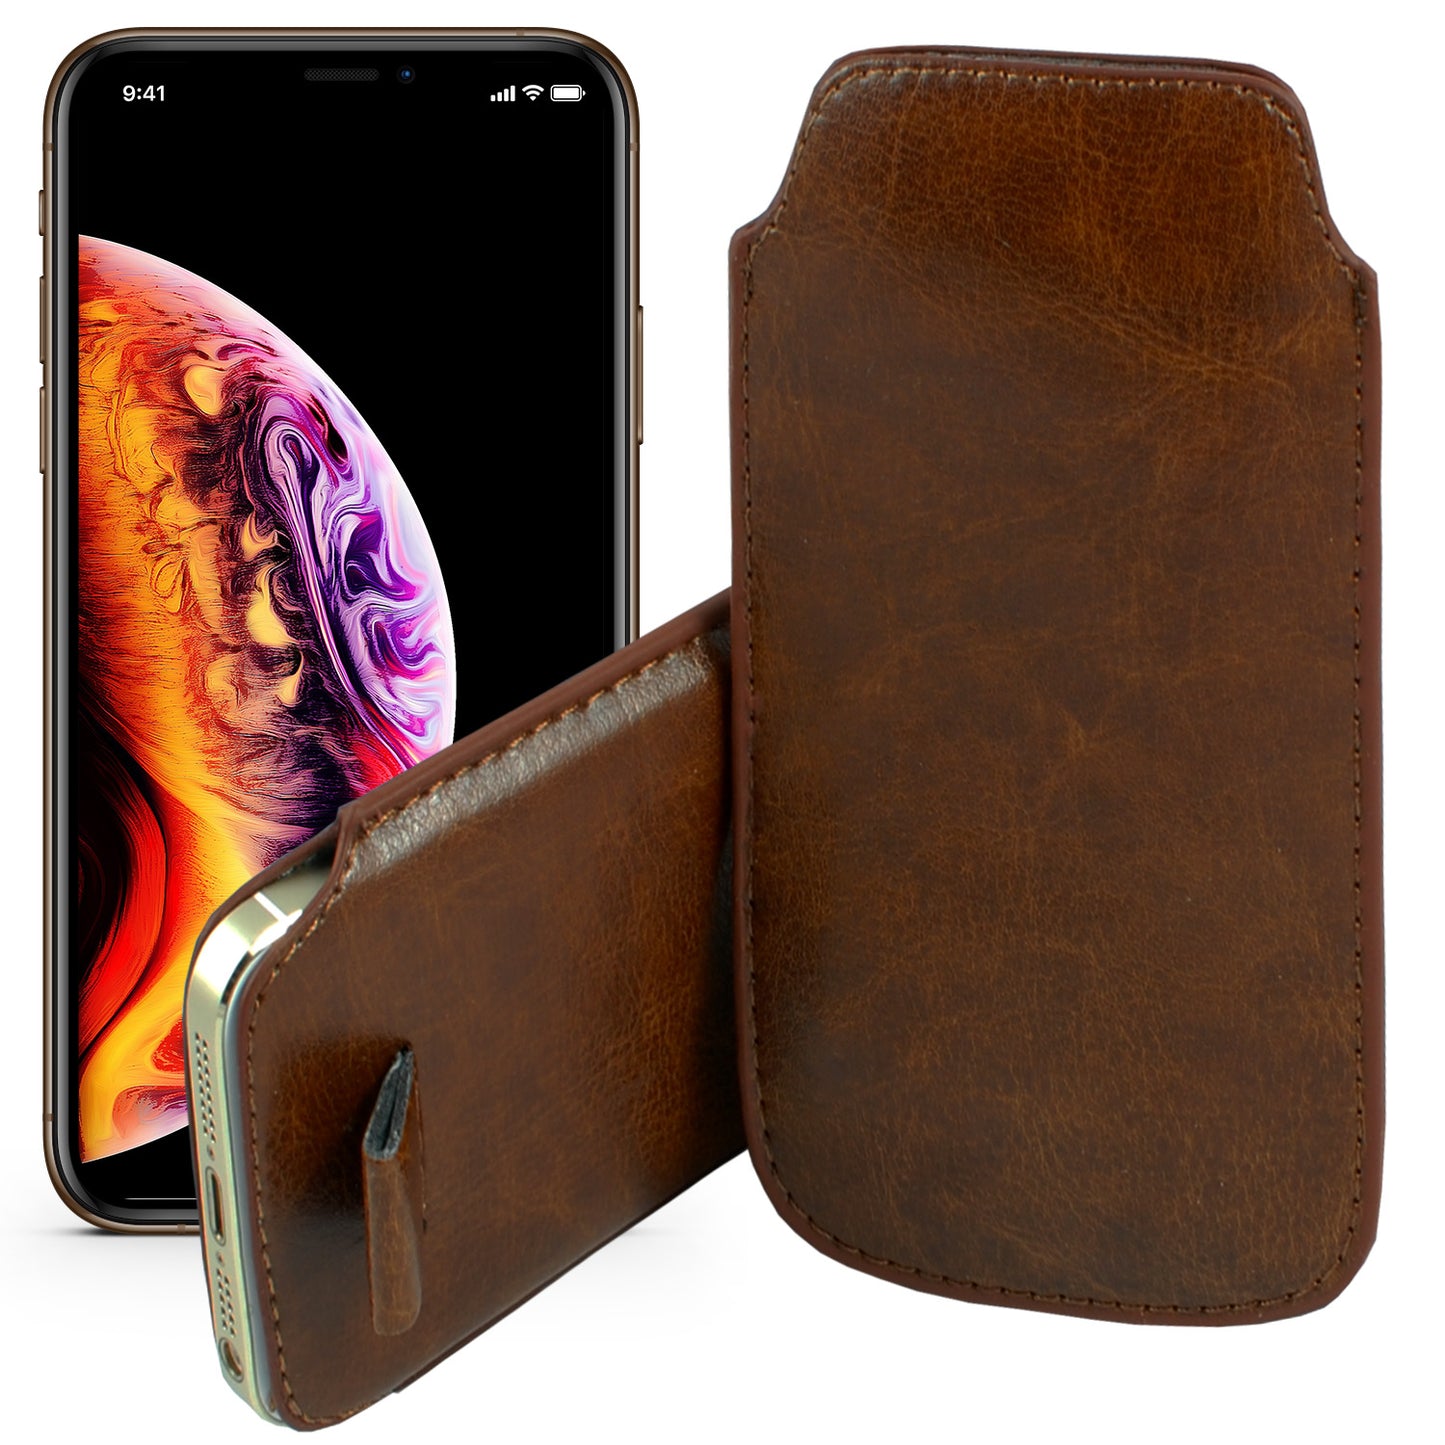 MEZON Apple iPhone 11 Pro Max (6.5") Brown Pull Tab Slim Faux Leather Pouch Sleeve Case Wireless Charging Compatible